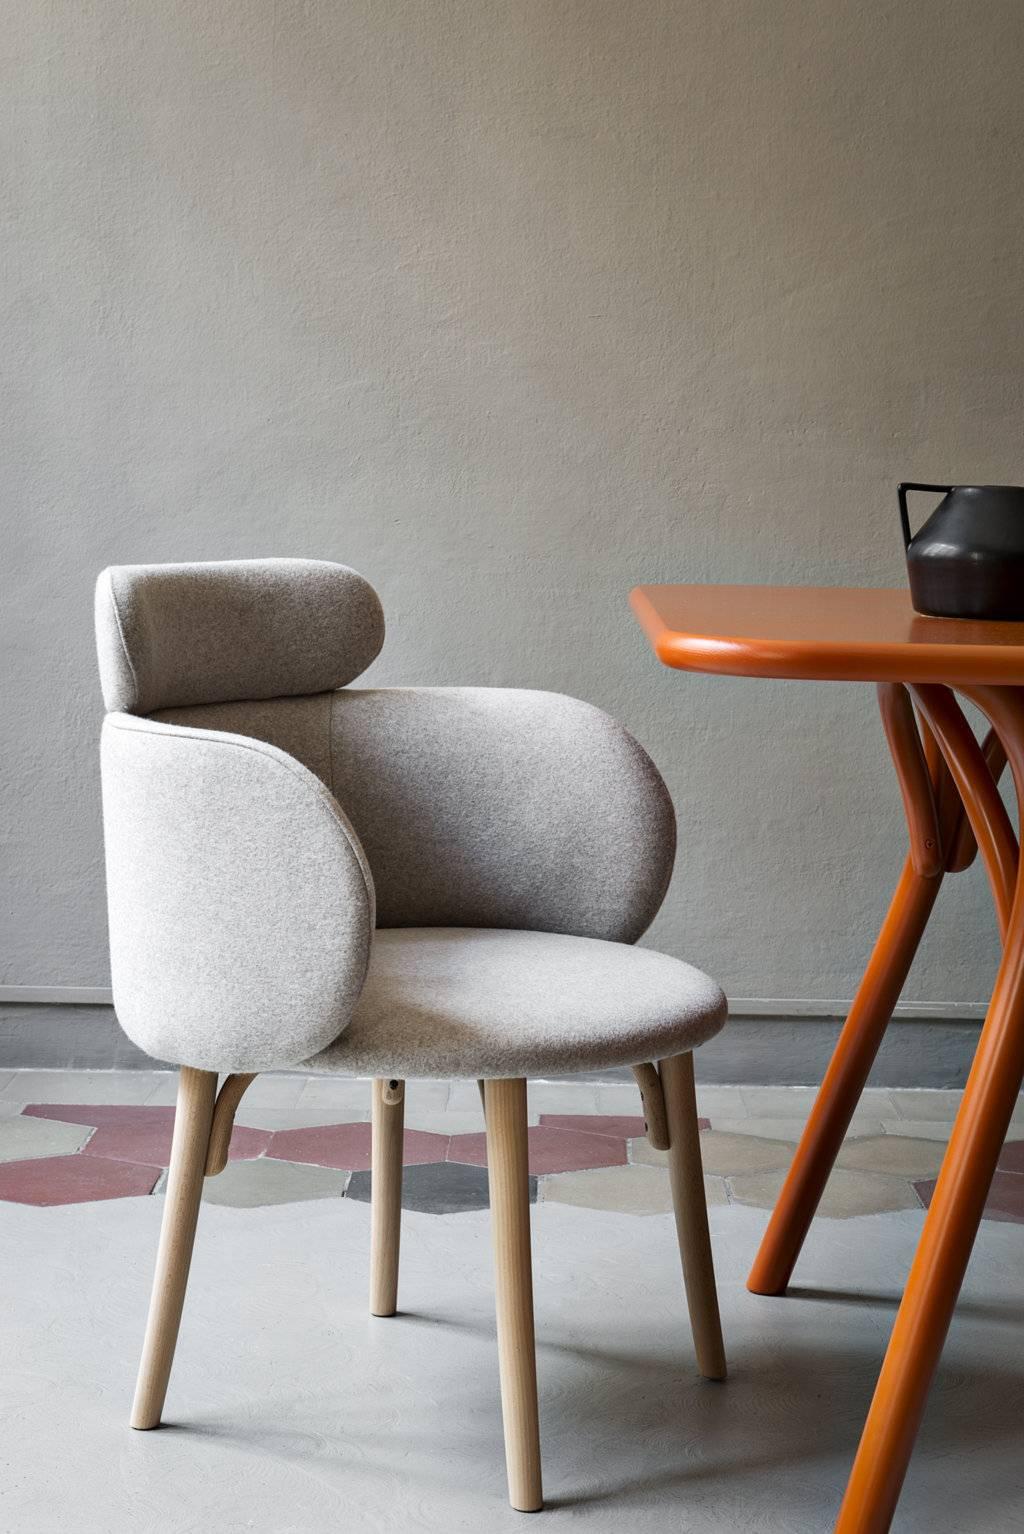 Beautiful forms characterize the Malit chair by Gordon Guillaumier, a further expression of the company's aesthetic research combining tradition with innovation. Wood is juxtaposed with upholstery in this product, recalling the Classic curves of